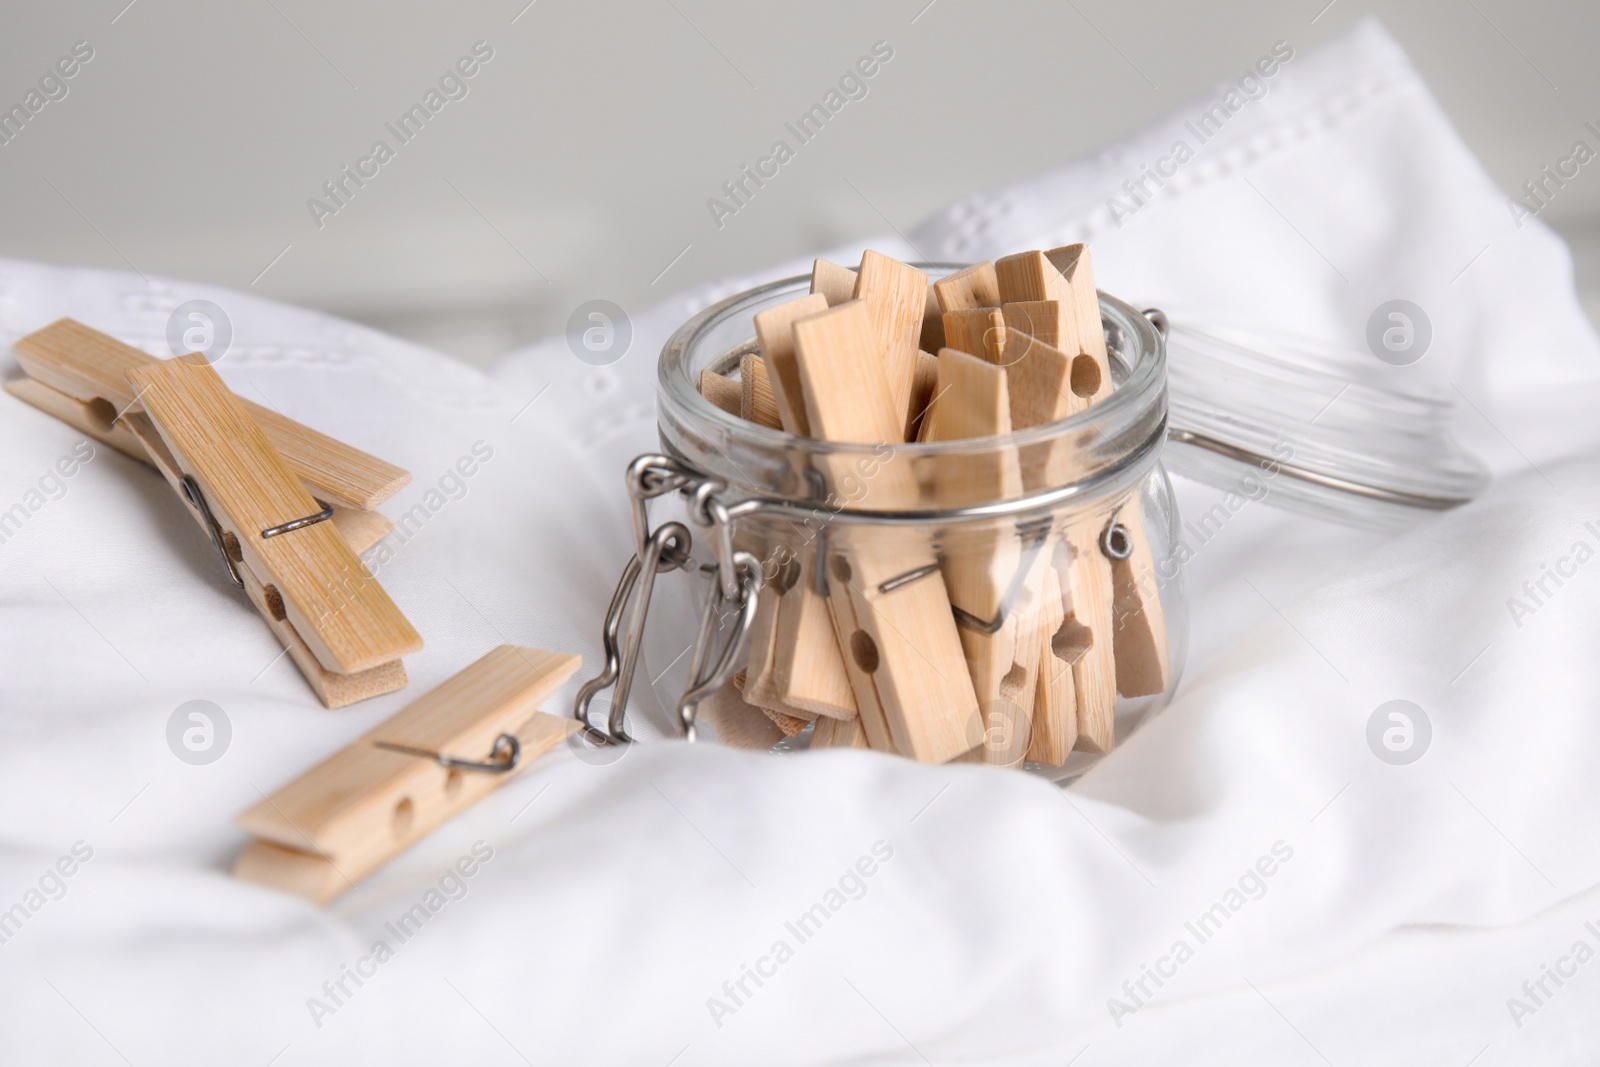 Photo of Many wooden clothespins and glass jar on white shirt